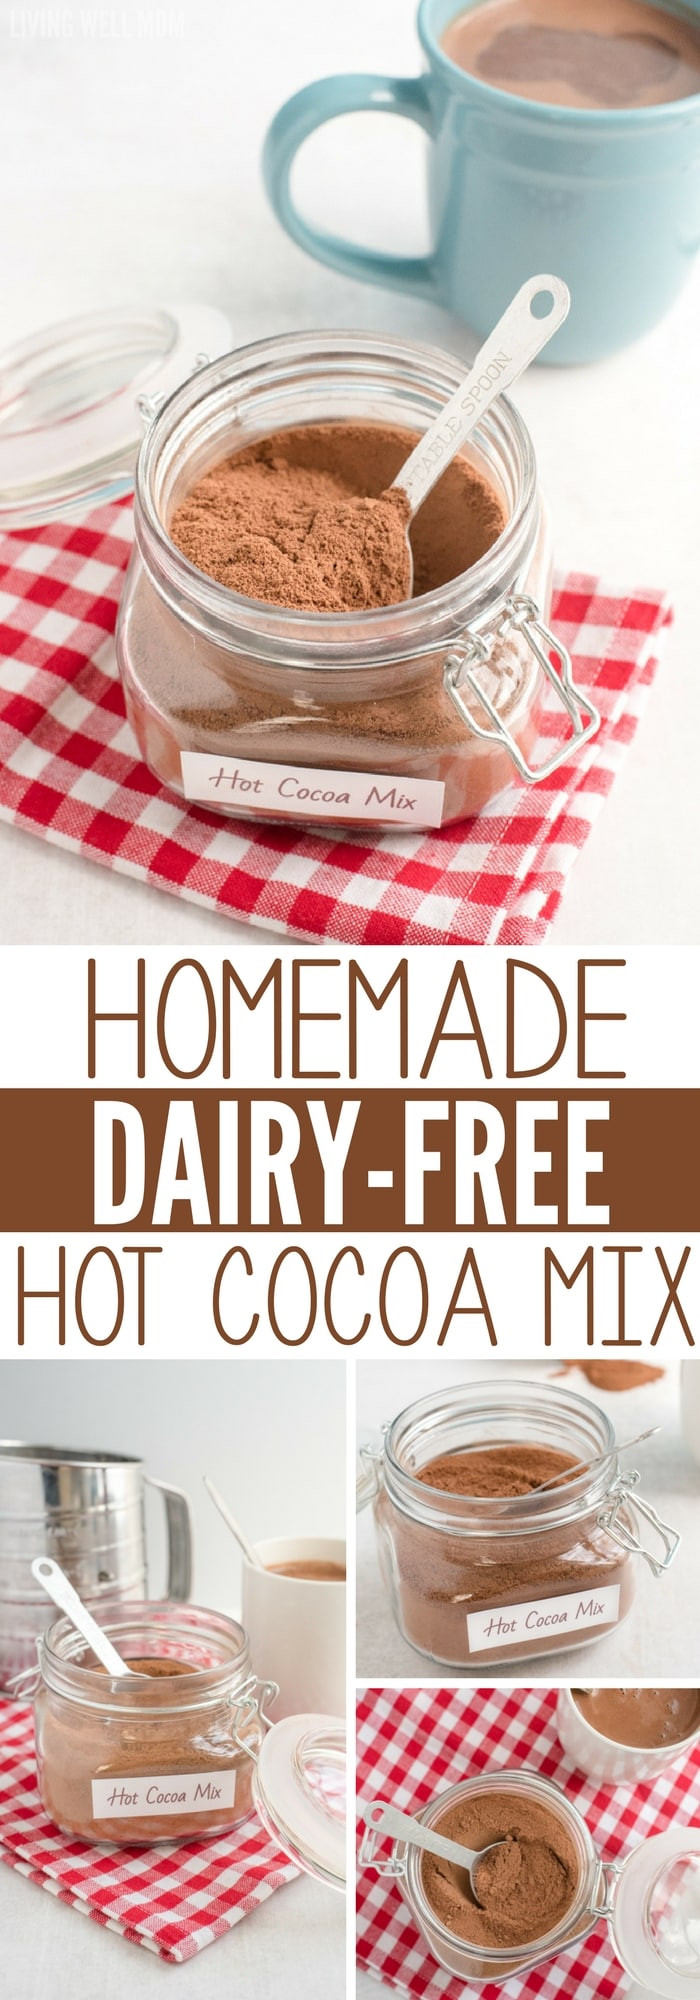 Dairy Free Cocoa Powder
 Homemade Hot Cocoa Mix for Kids Dairy Free